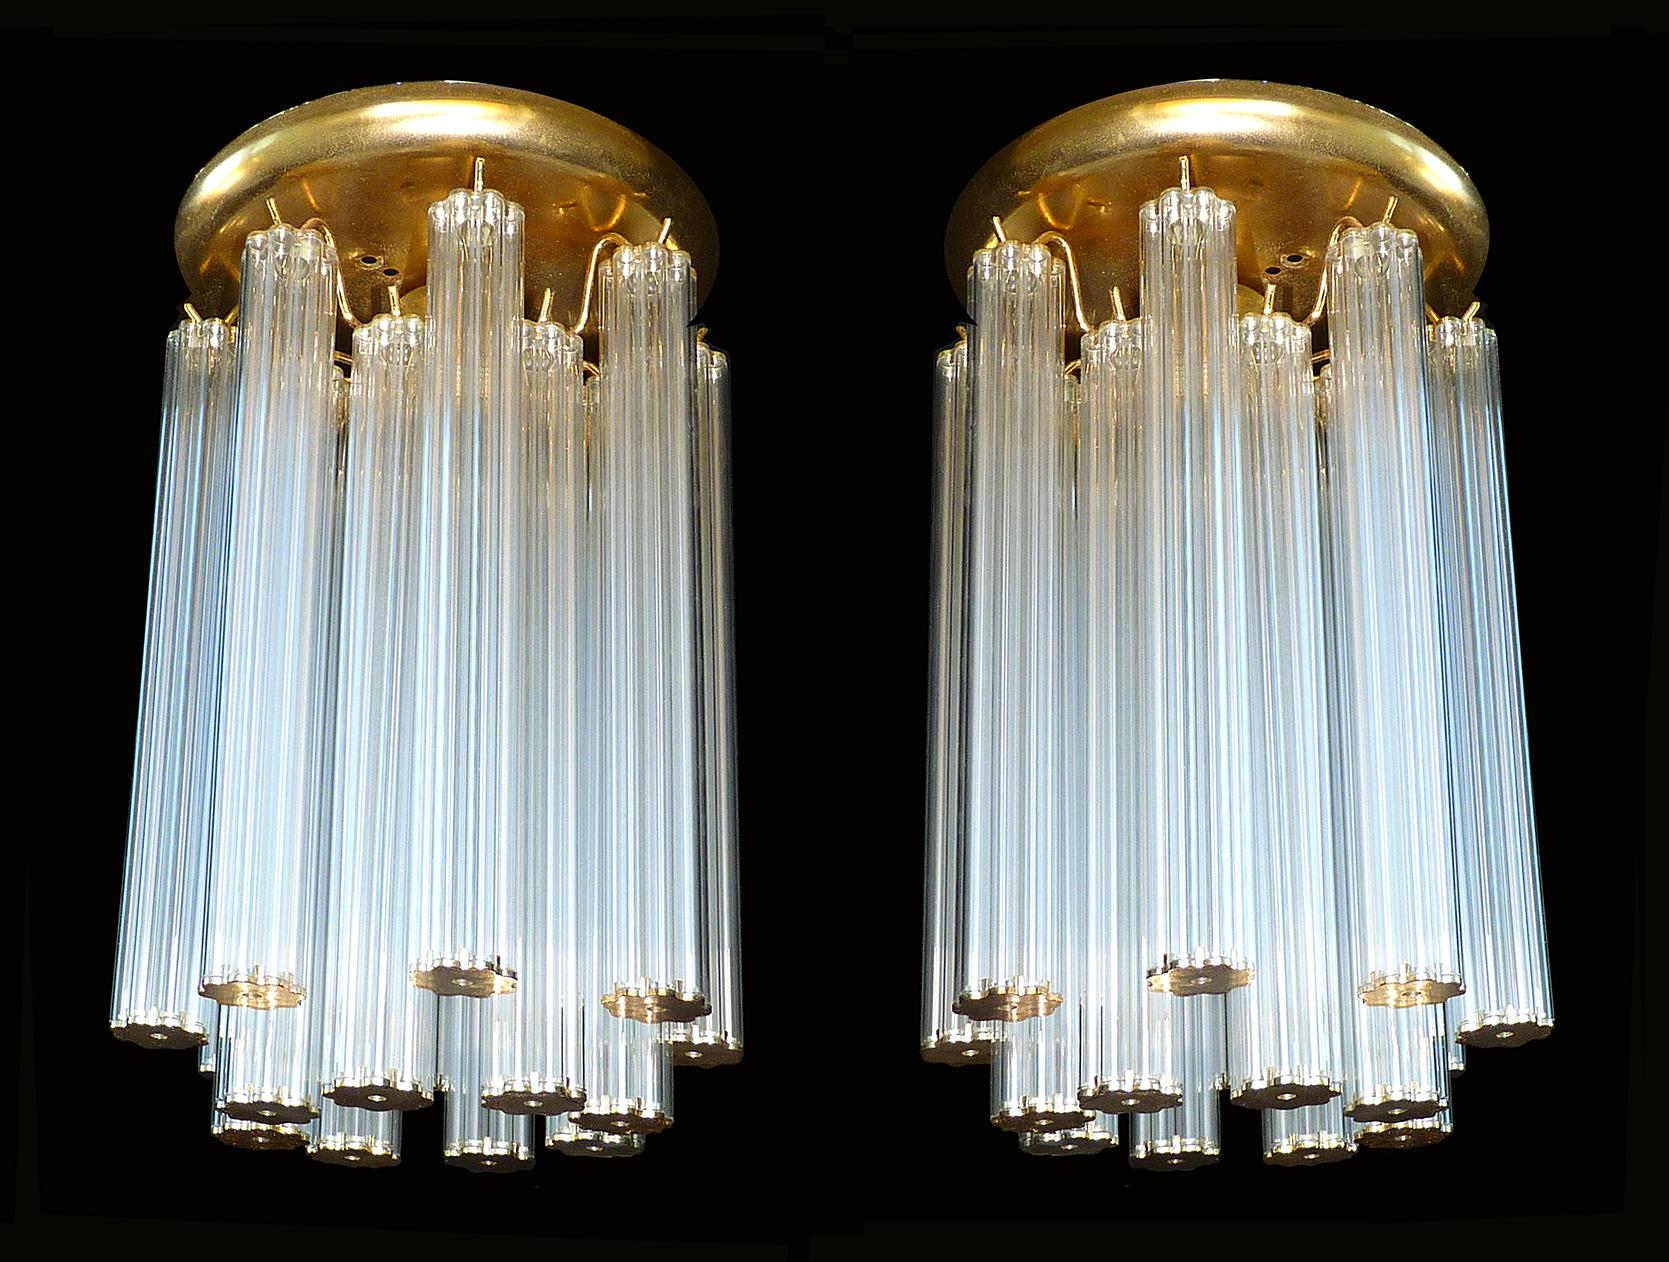 Measures:
Diameter 8 in/ 20 cm
Height 13.7 in/ 35 cm
Weight: 3,5 Kg / 8 lb
1-light bulb E-27, 60w, good working condition/European wiring.
128/ 16 sets of 8 glass tubes each in 2 layers
Also have macthing chandeliers and sconces
Your item will be